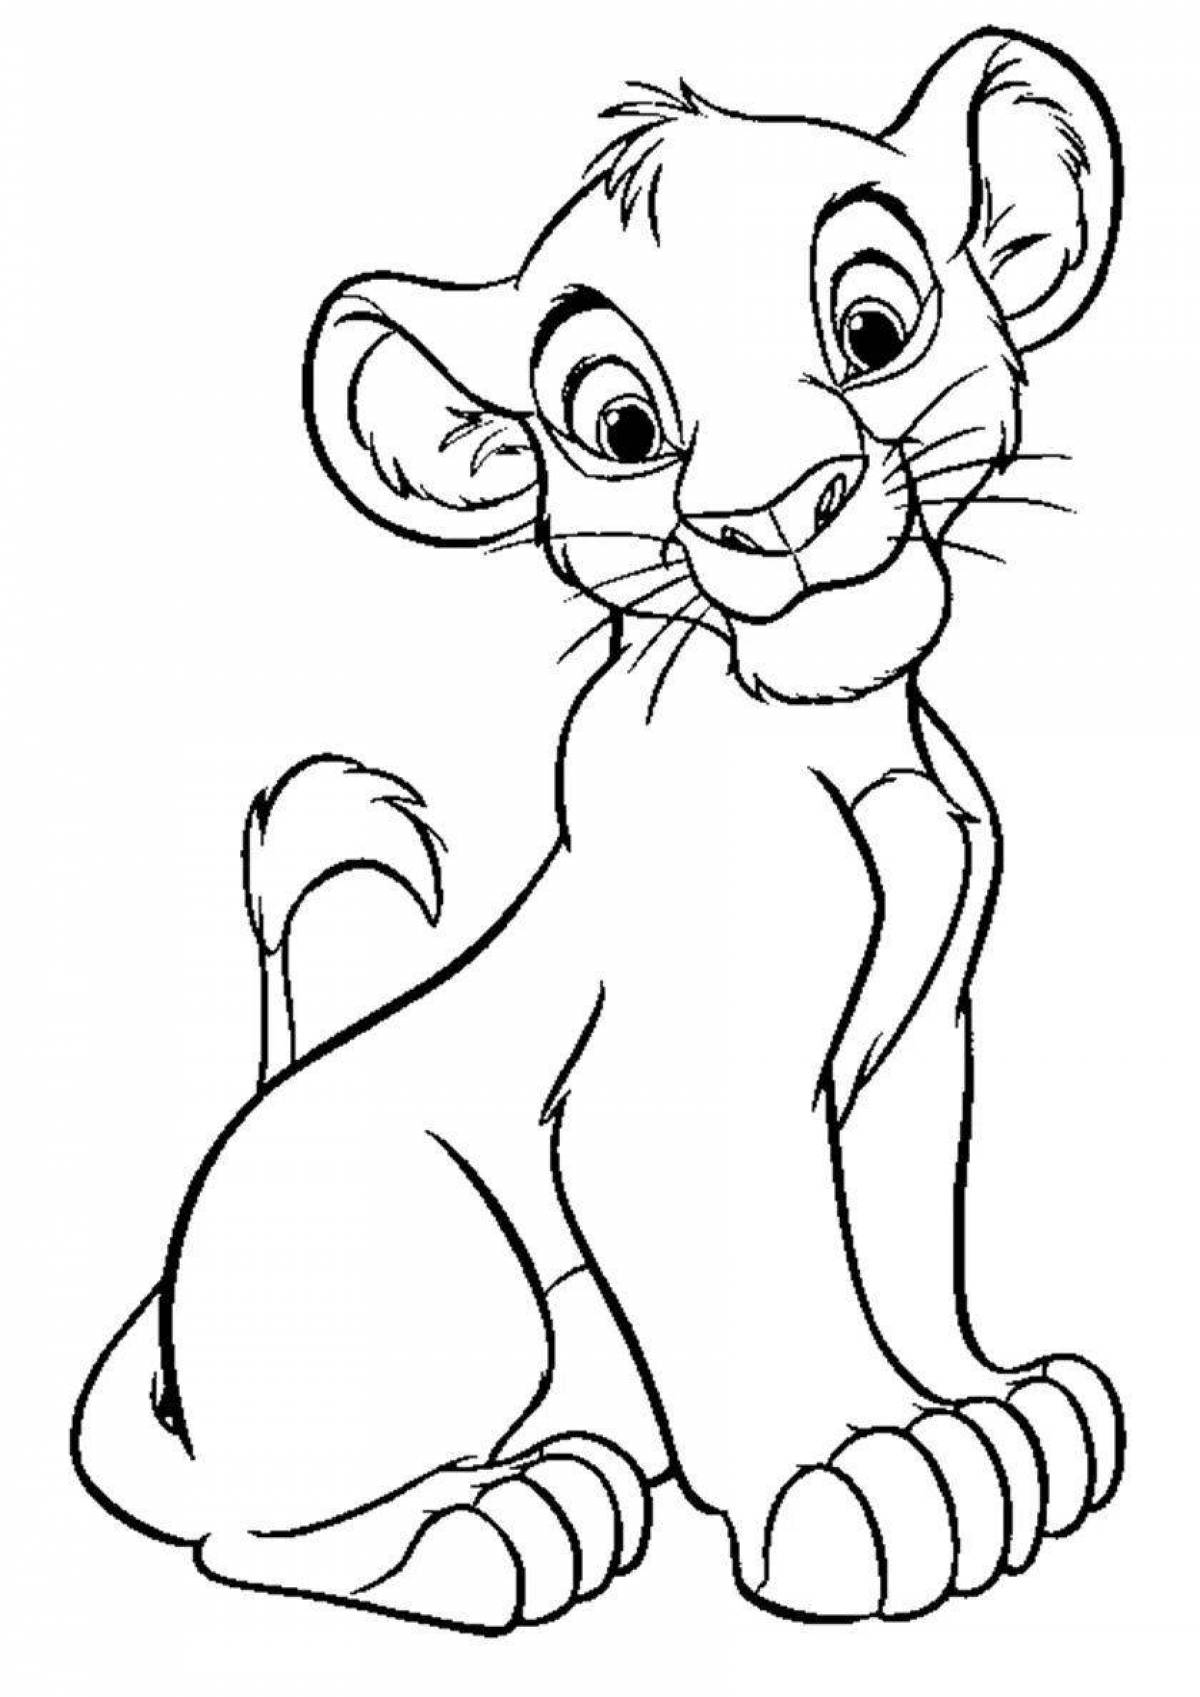 Cute simba coloring page for kids